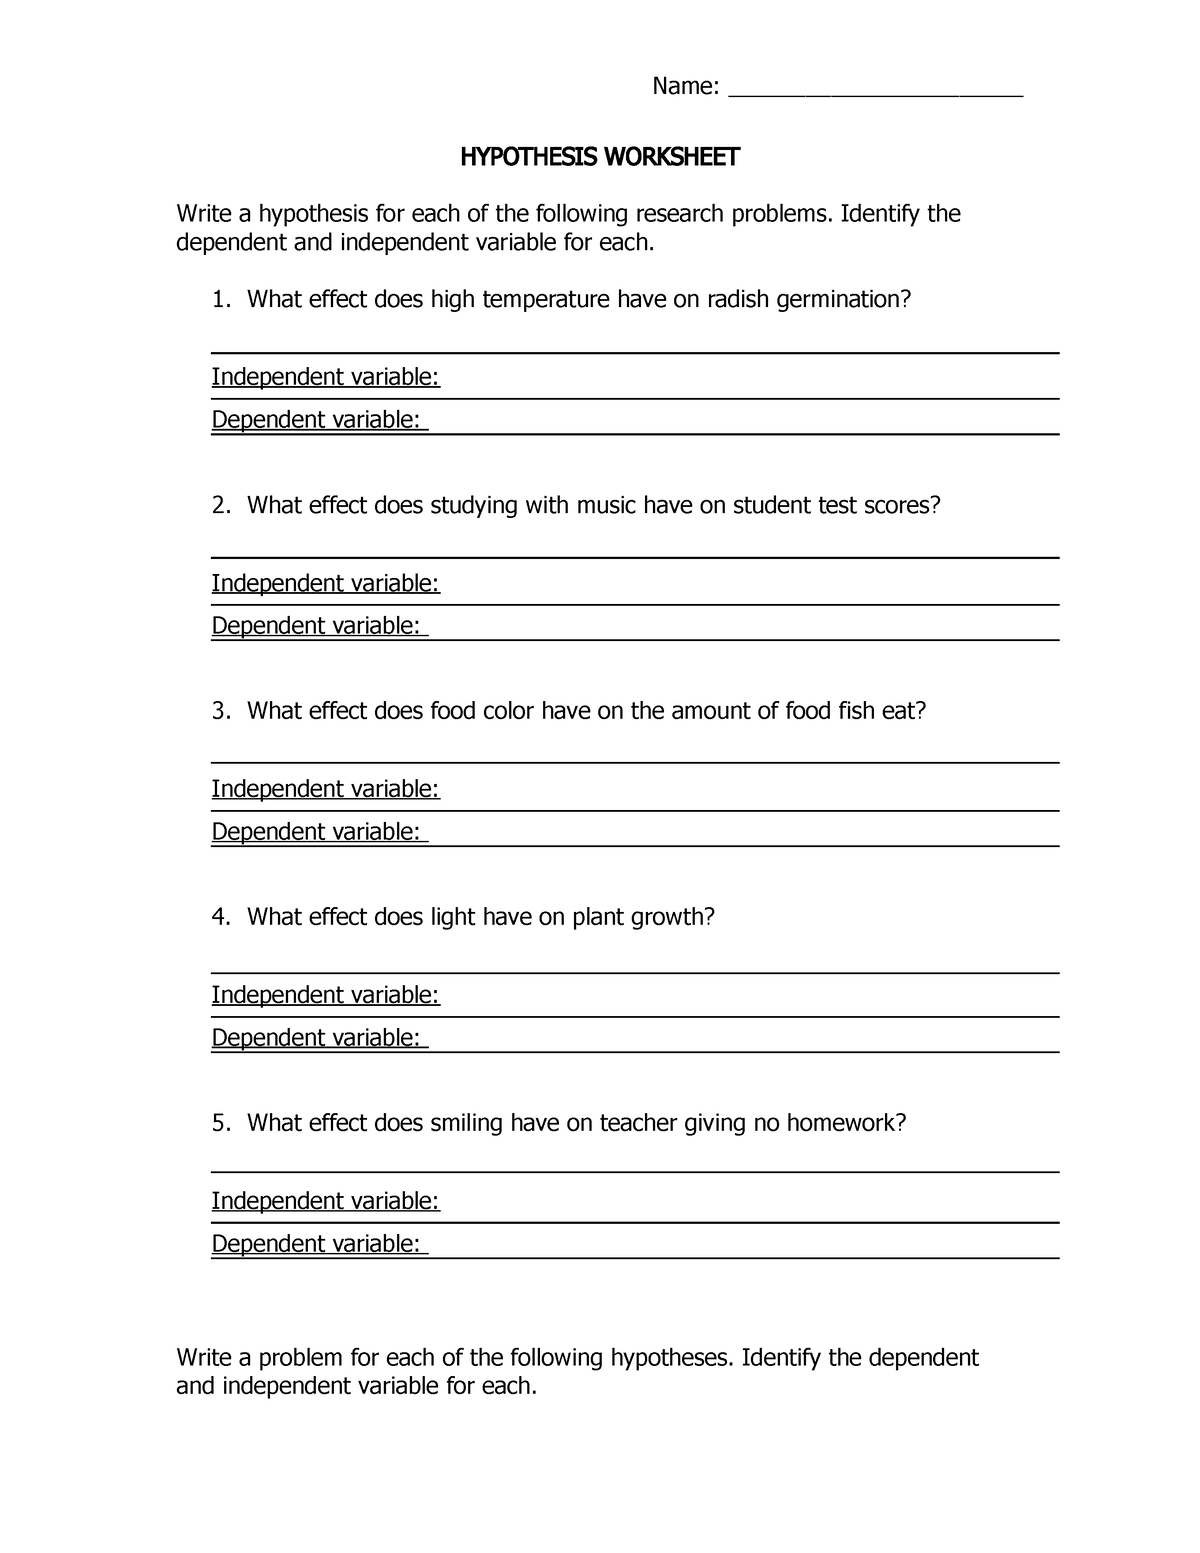 Practice Writing Hypothesis Worksheet Answer Key